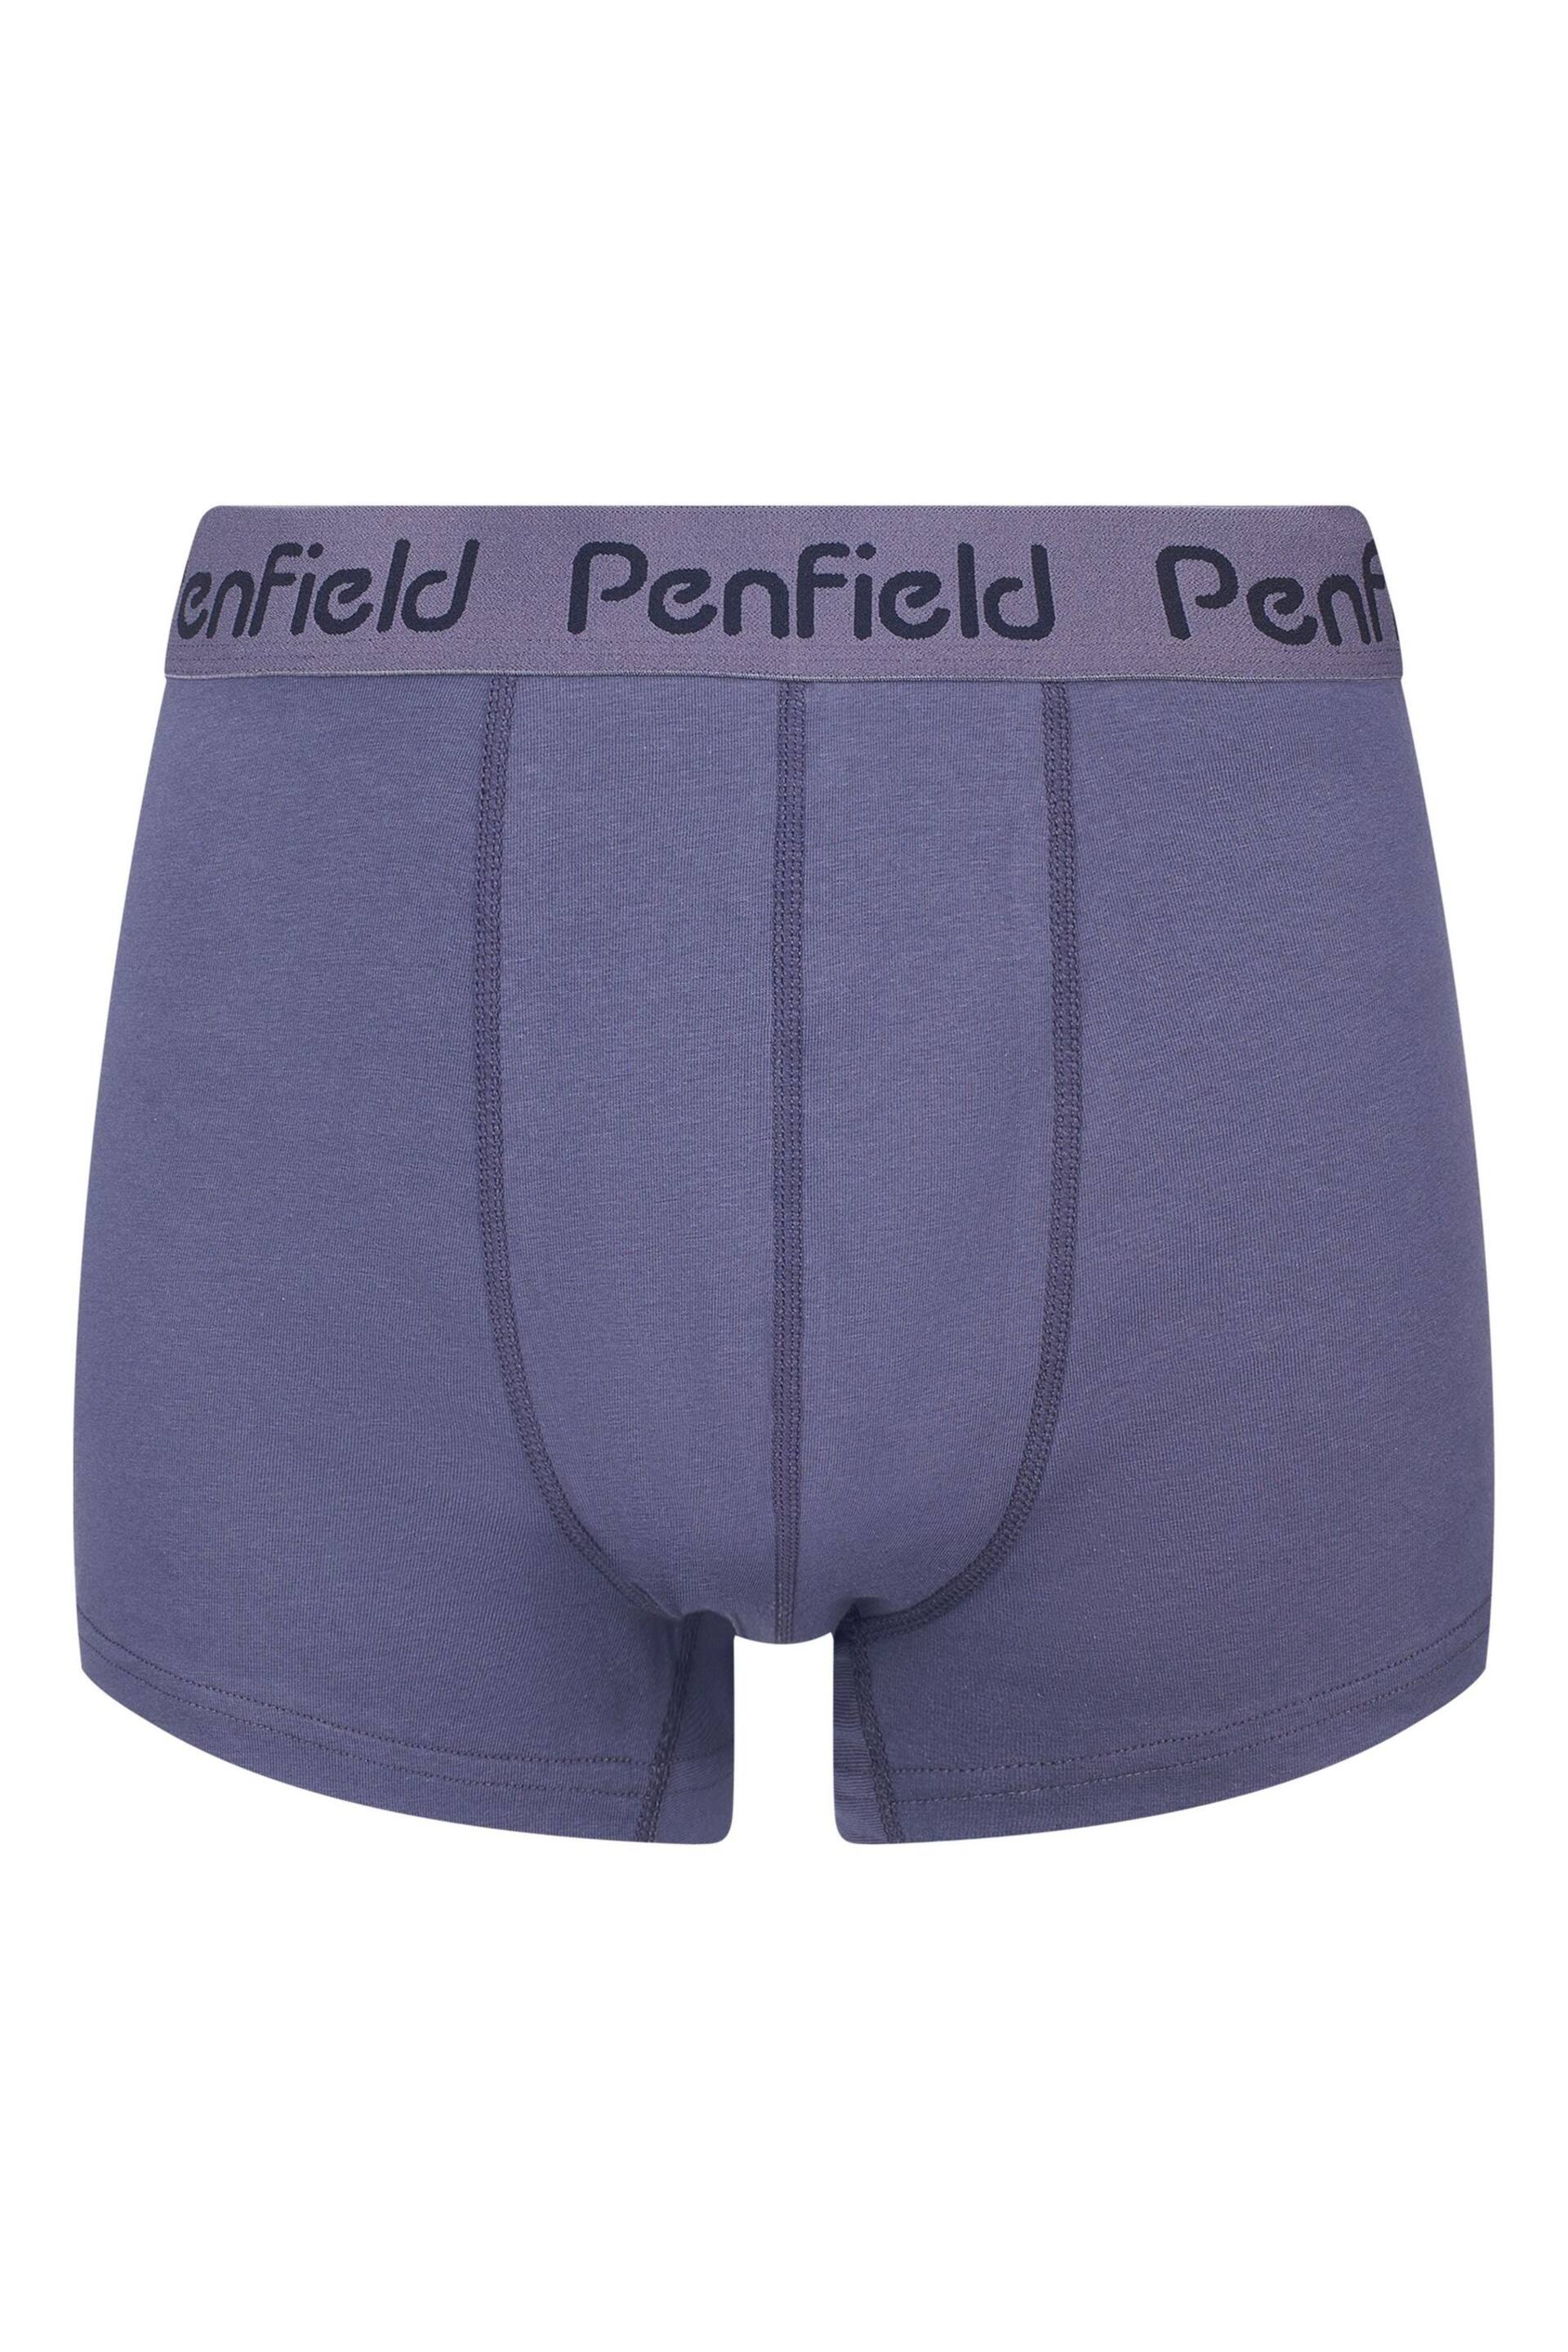 Penfield Blue Penfield Script Print Boxers 3 Pack - Image 3 of 5